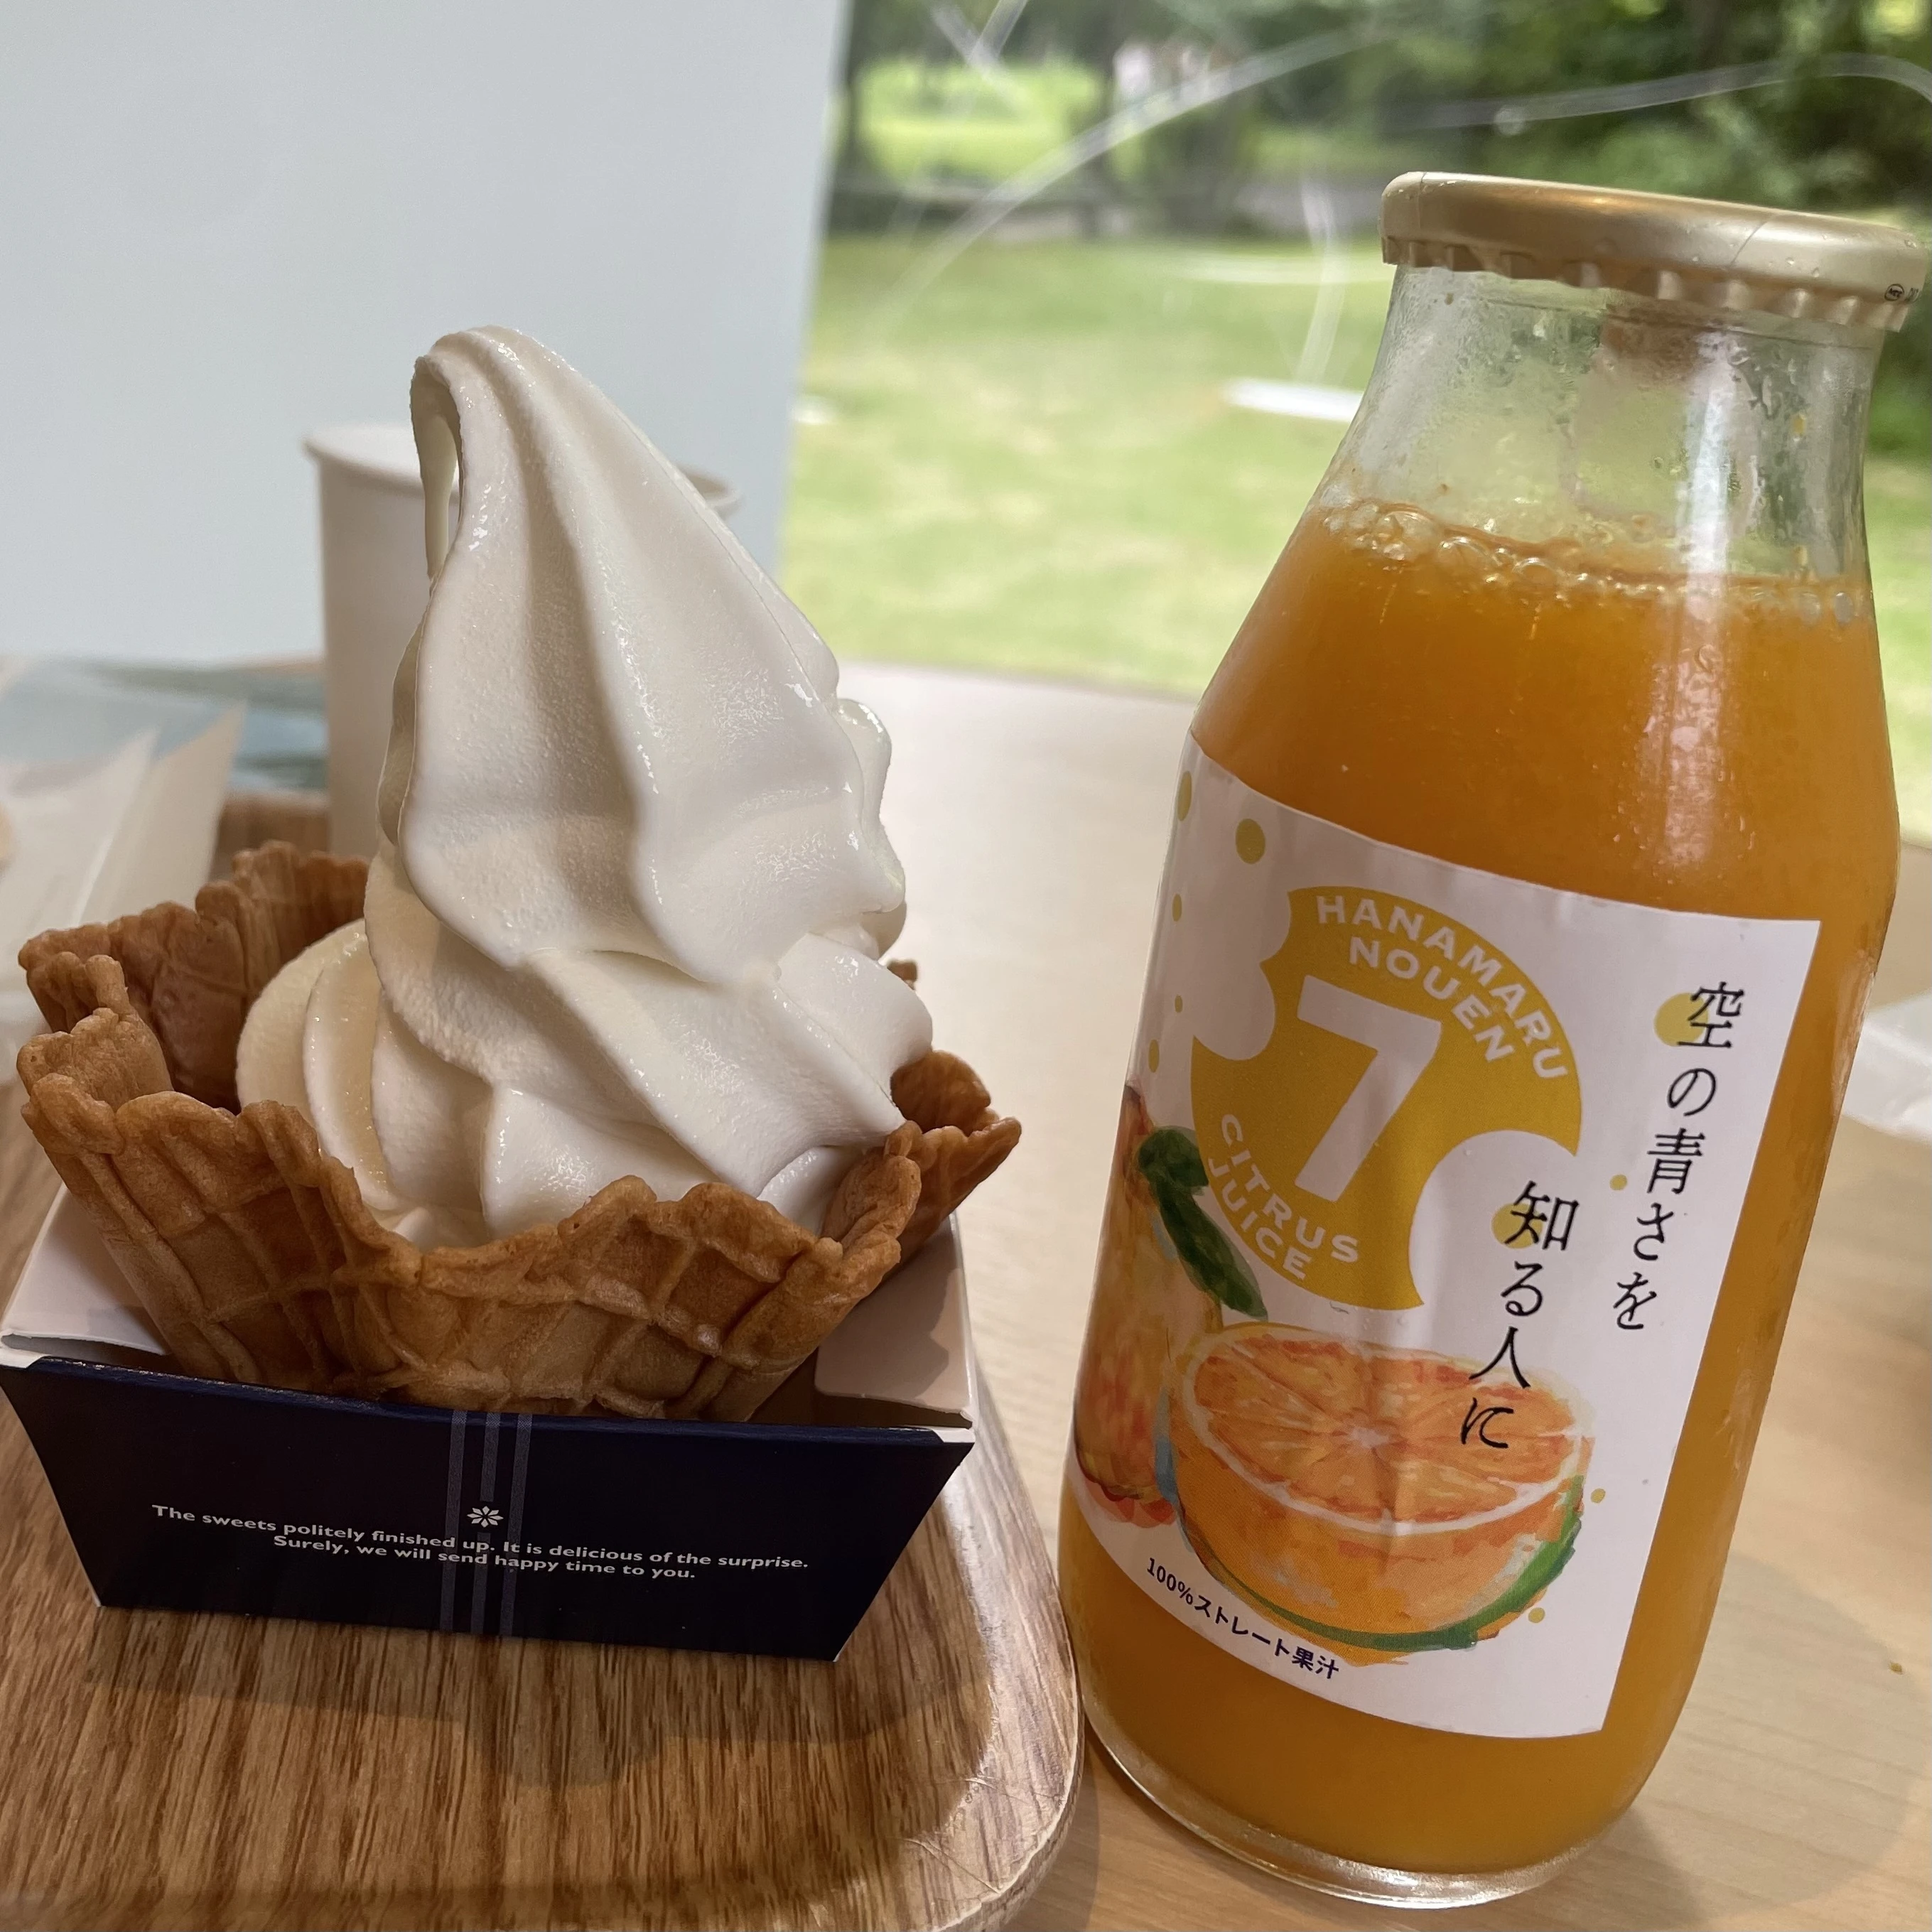 「The Hakone Open-Air Museum Cafe」のドリンクとソフトクリーム